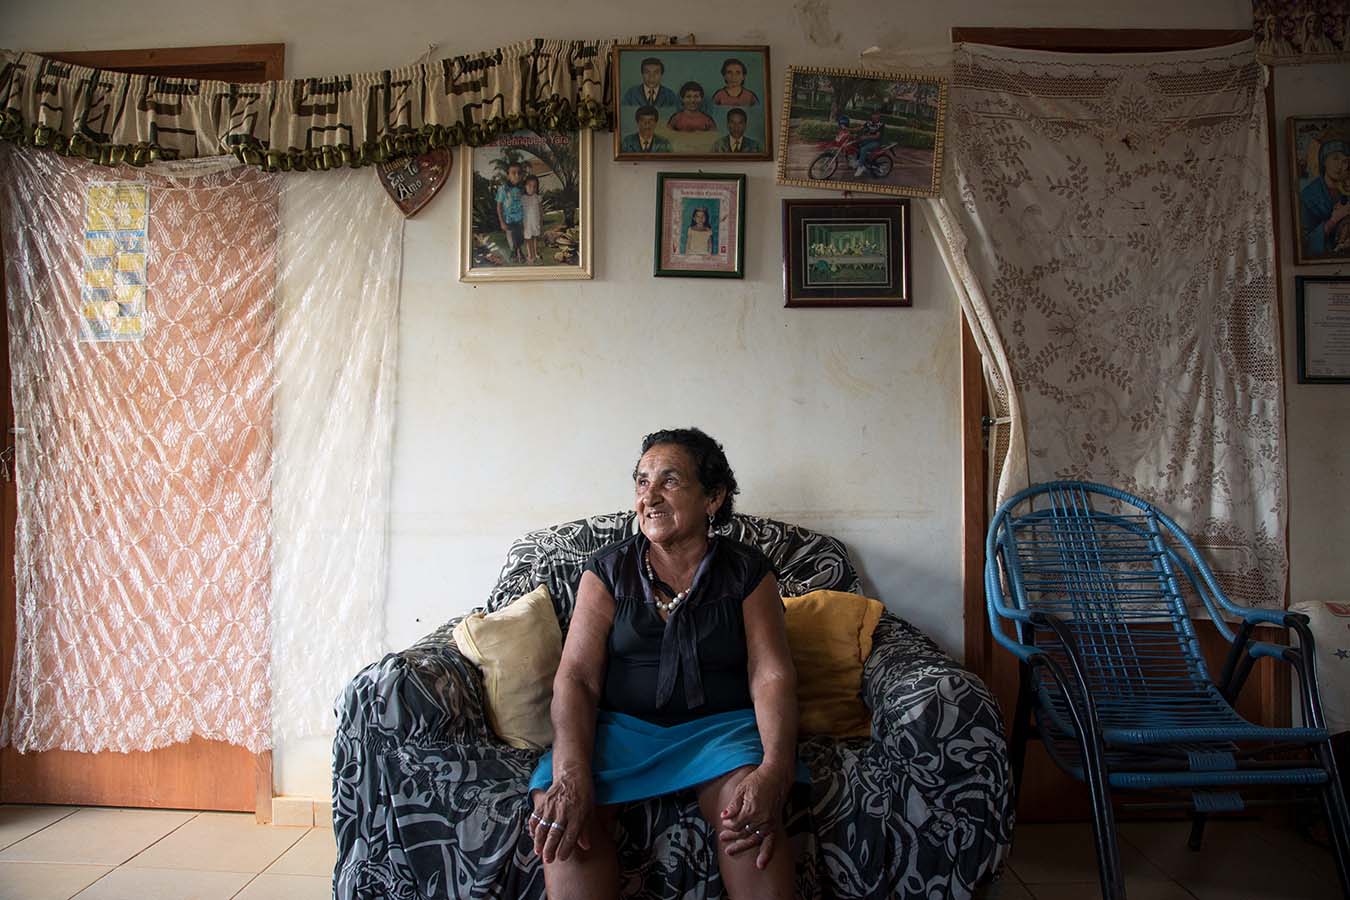 The interior of a house in the resettlement neighborhood of Laranjal, Altamira, Pará. Photo by Thiago da Costa Oliveira.